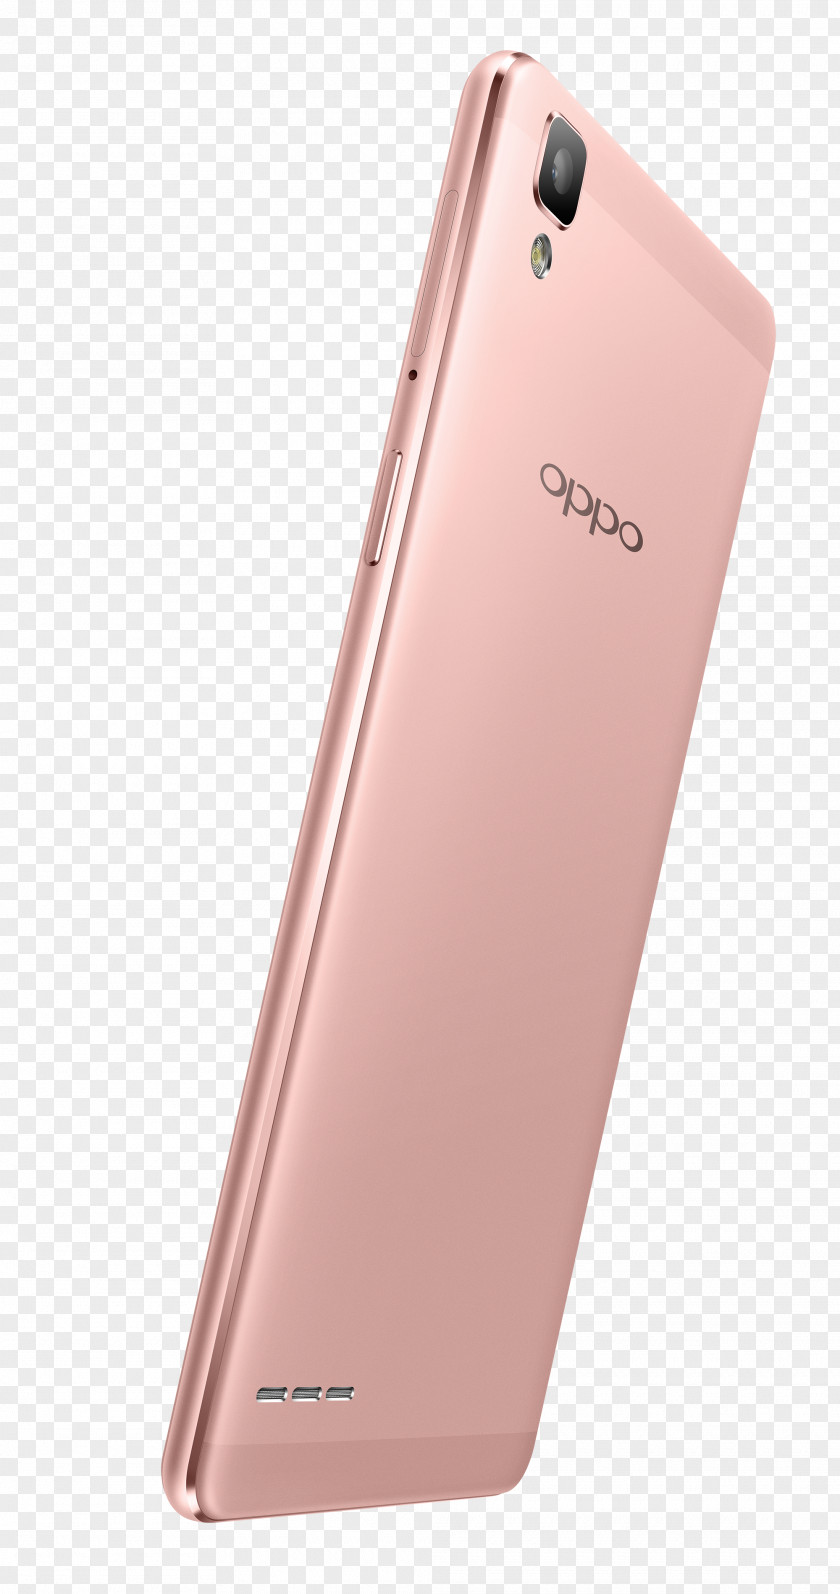 Smartphone OPPO R7 F1s Digital PNG